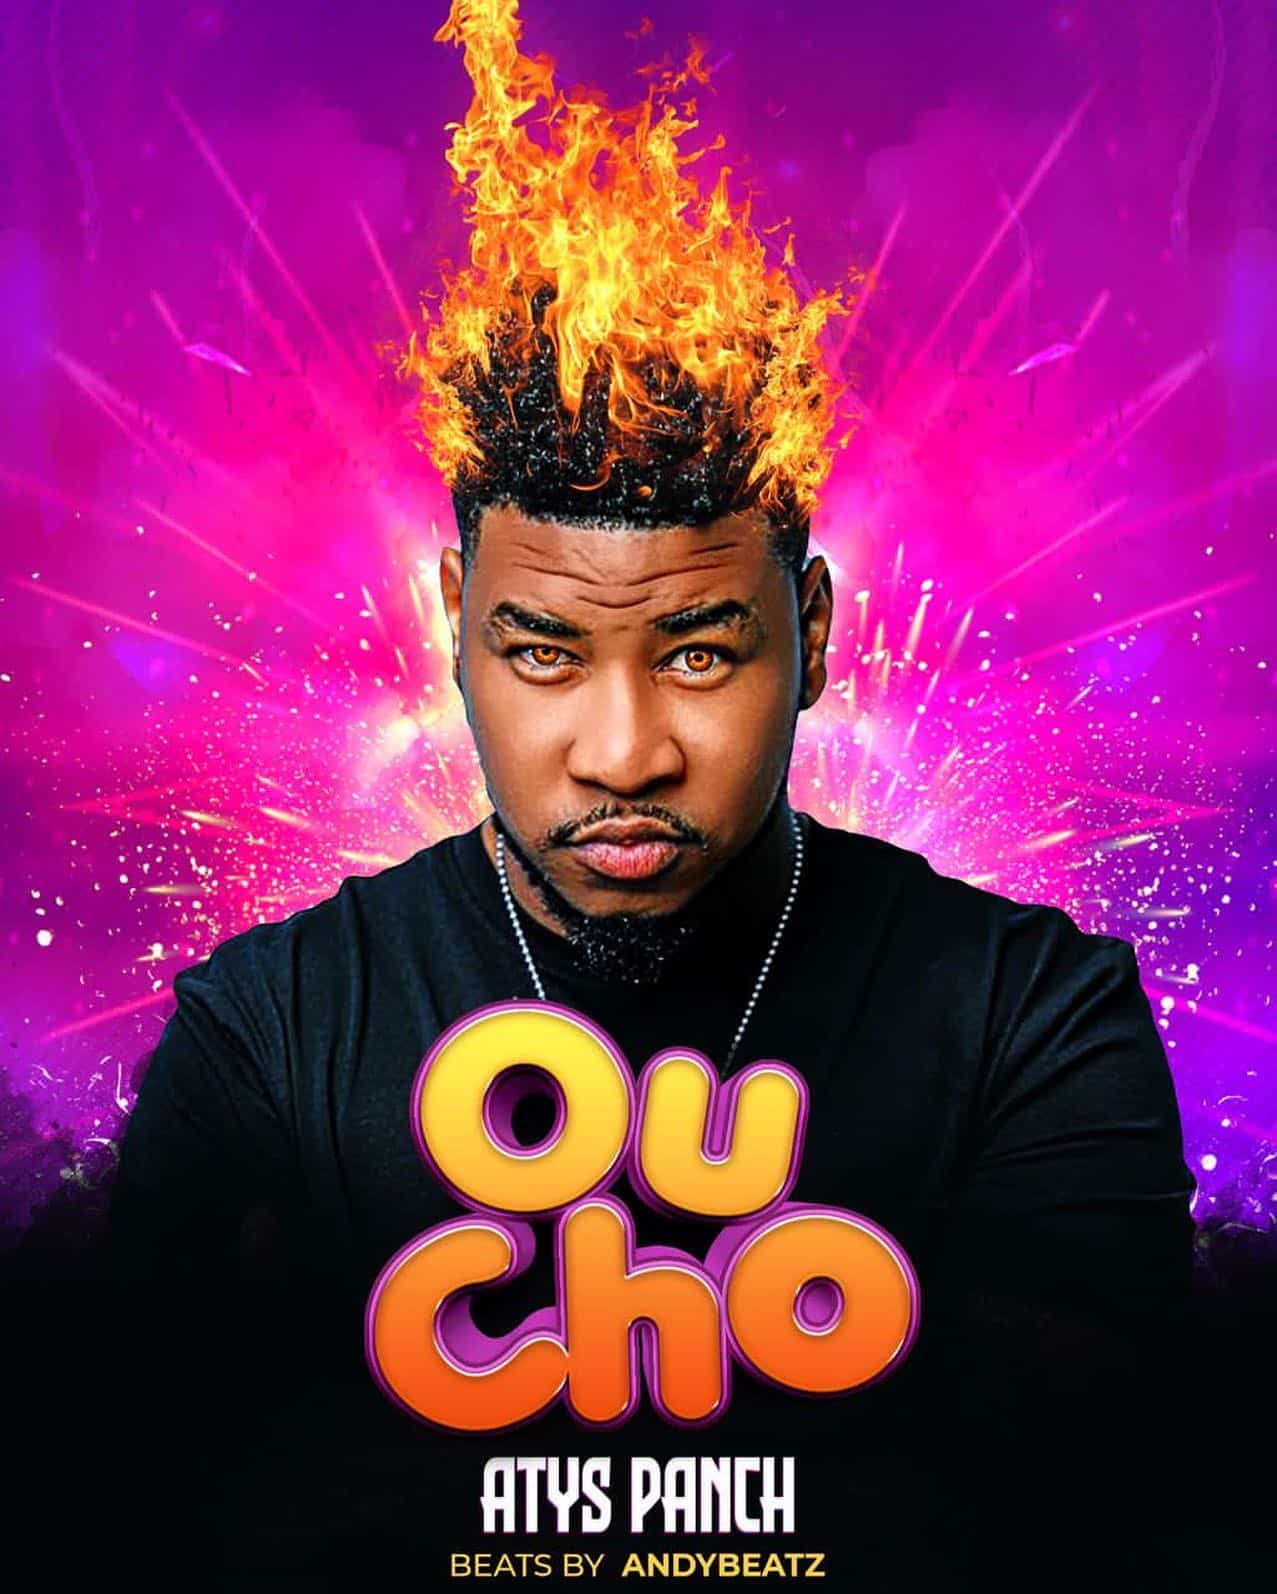 OU CHO Atys Panch AUDIO OFFICIAL